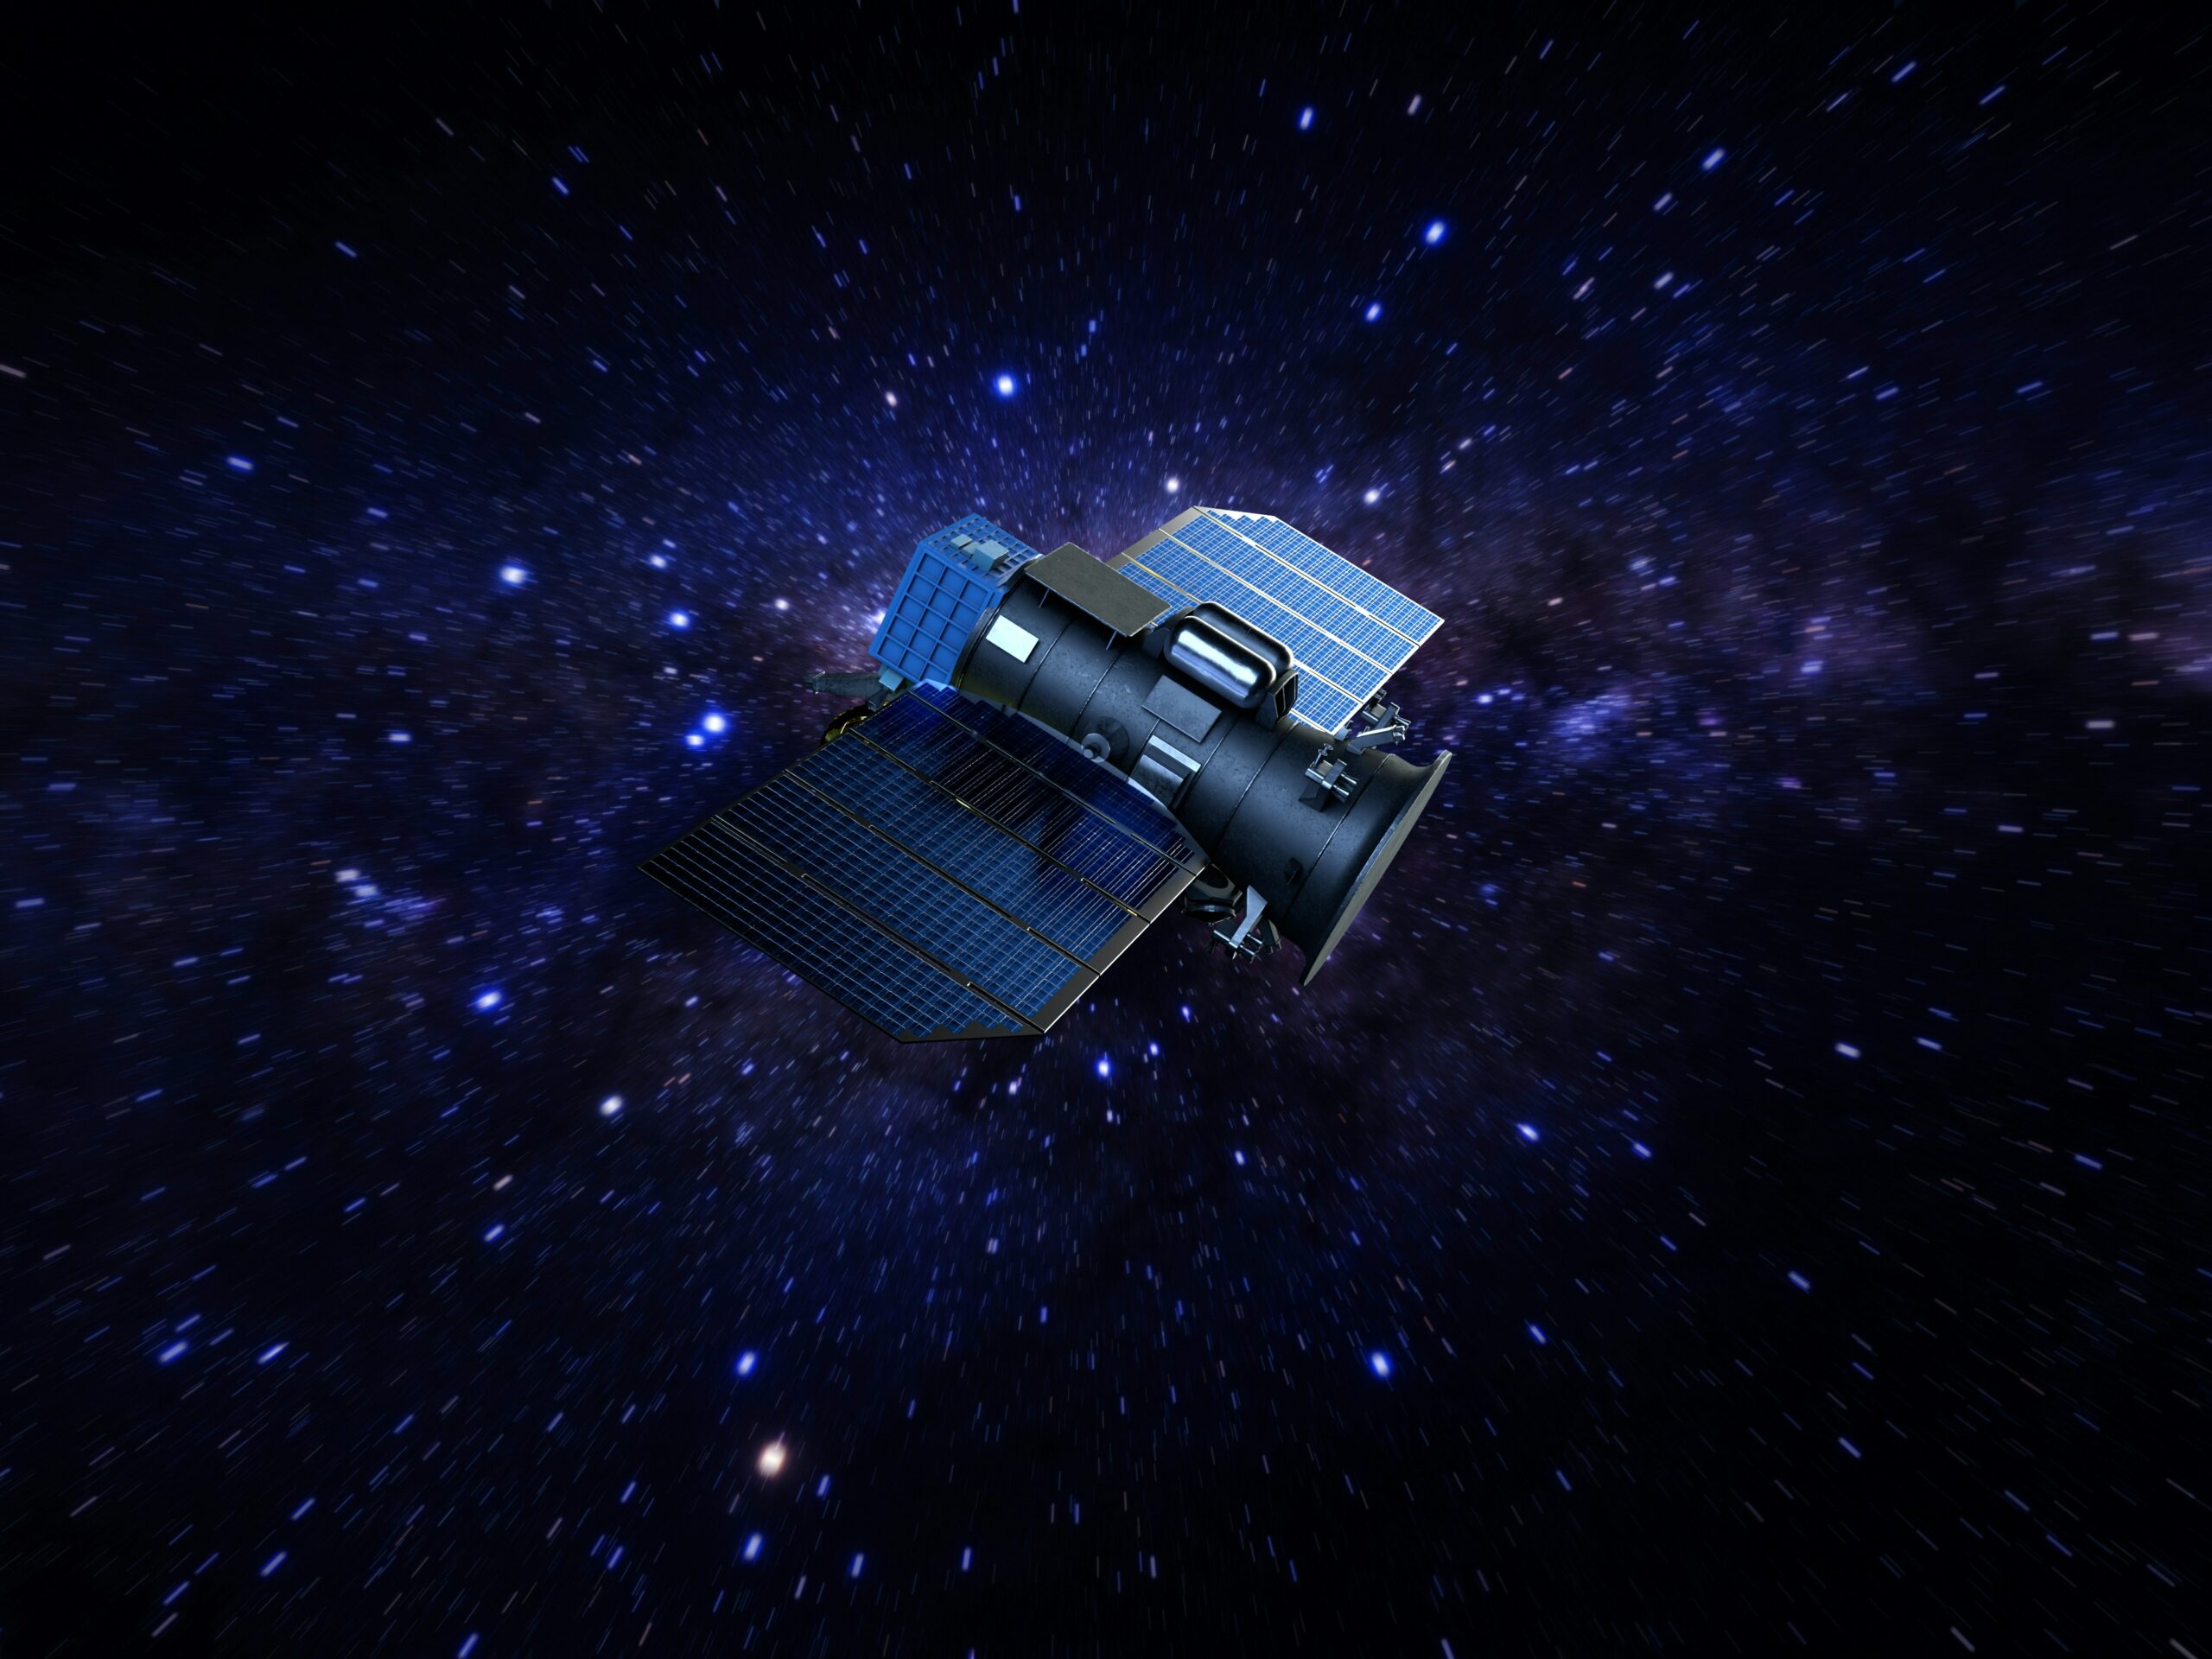 An artist's rendering of a satellite in space. The satellite is seen floating amongst the stars in a dark blue region in space.